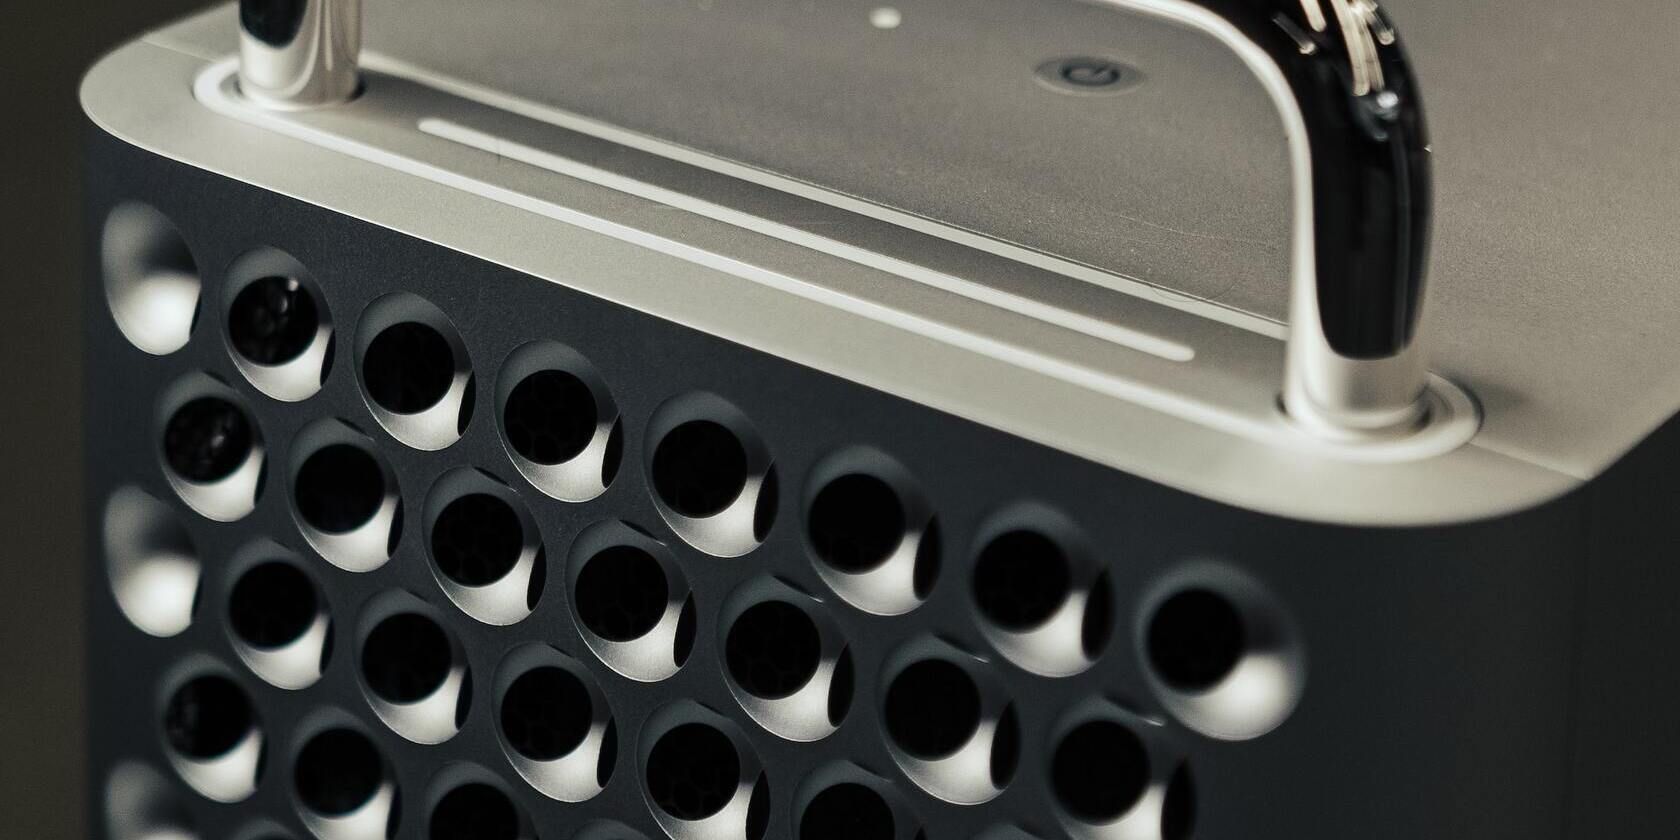 Close up photo of a Mac Pro showing part of the side and part of the top